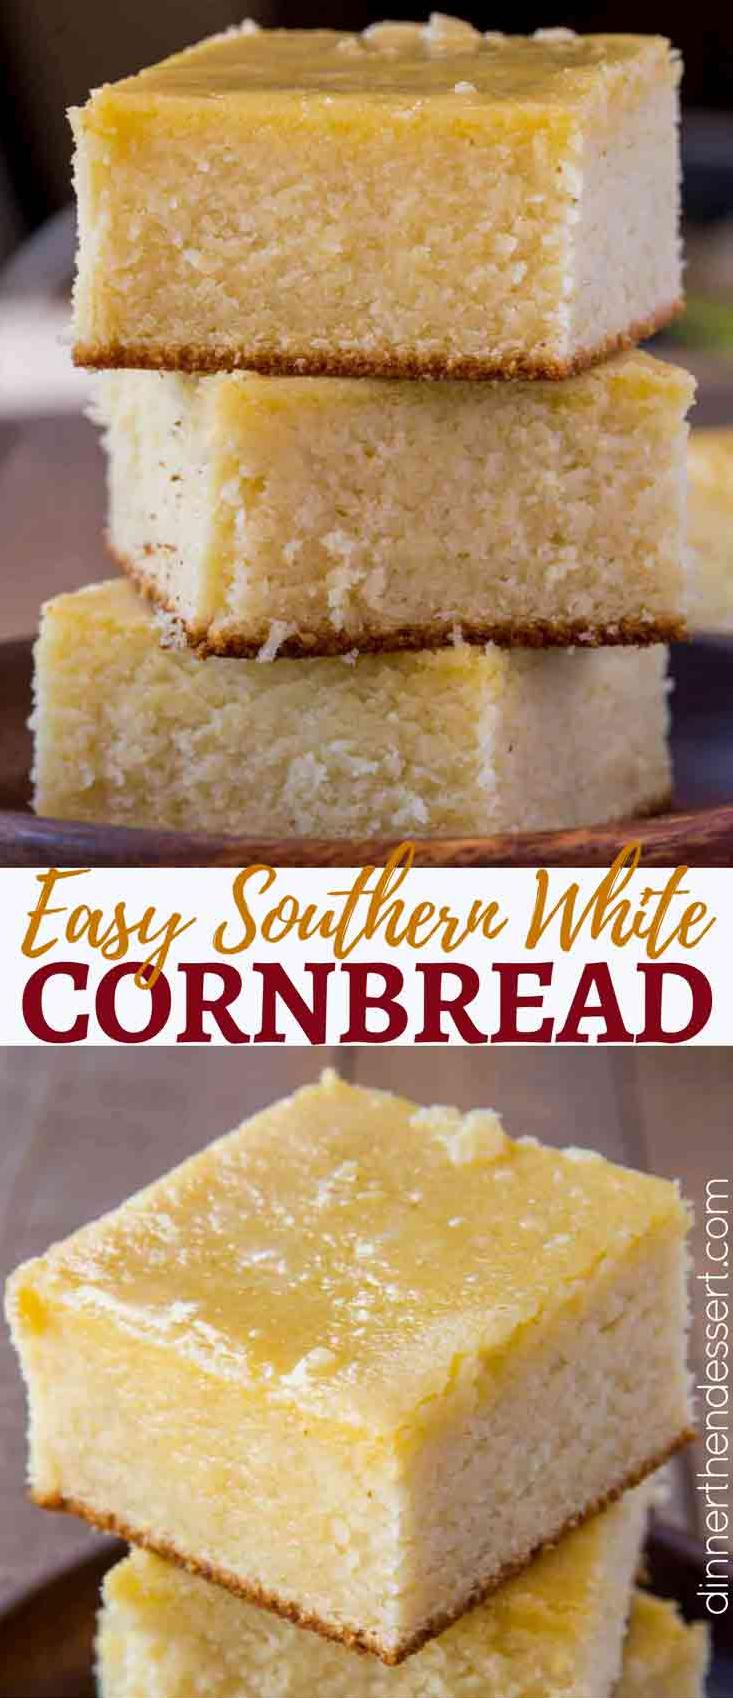  Perfectly seasoned with a hint of sweetness, this Southern White Cornbread is one that will leave your taste buds yearning for more.